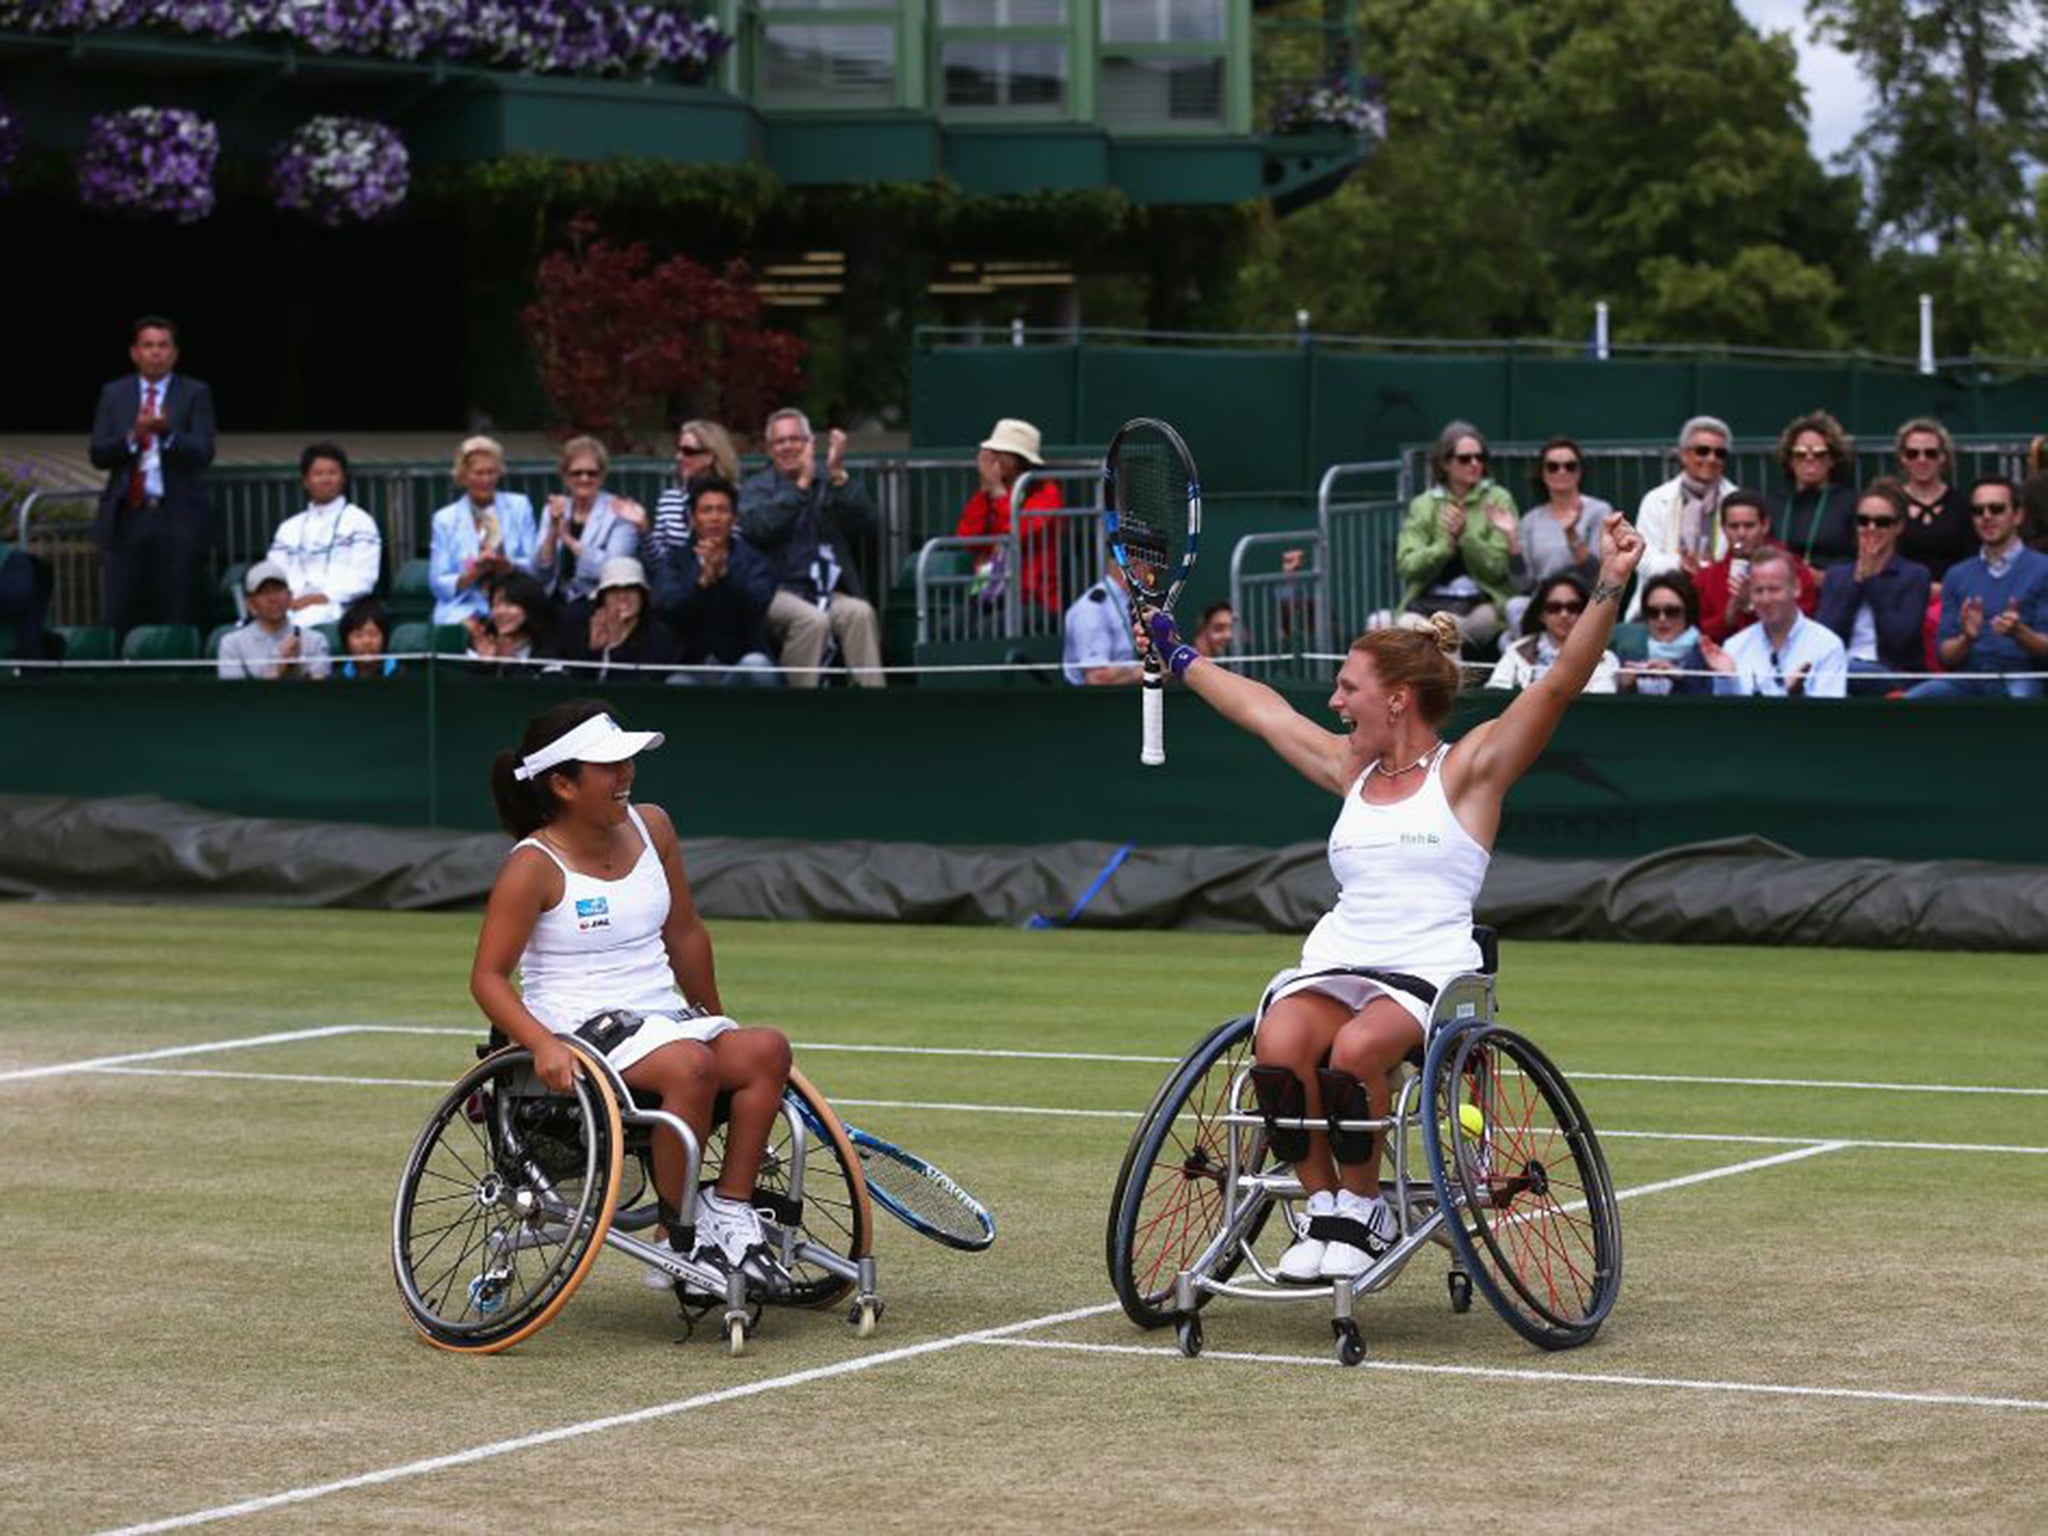 Great Britain’s Jordanne Whiley, right, celebrates retaining the women’s wheelchair doubles title with Yui Kamiji, of Japan